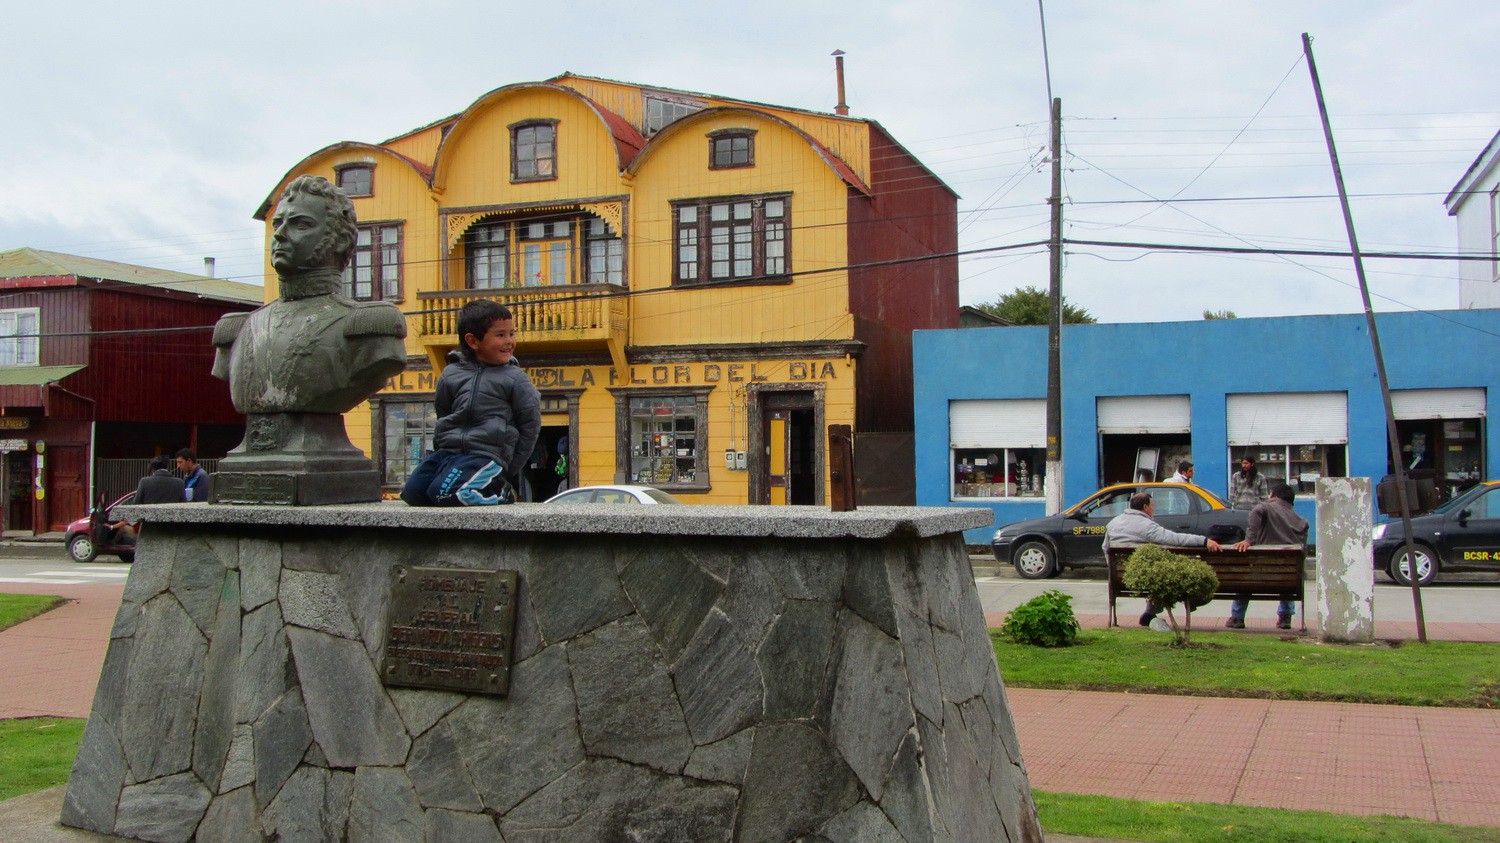 Boy with Bernardo O'Higgins, the Chilean National Hero. Yellow front of a hardware and flower store of Maulin in the background.